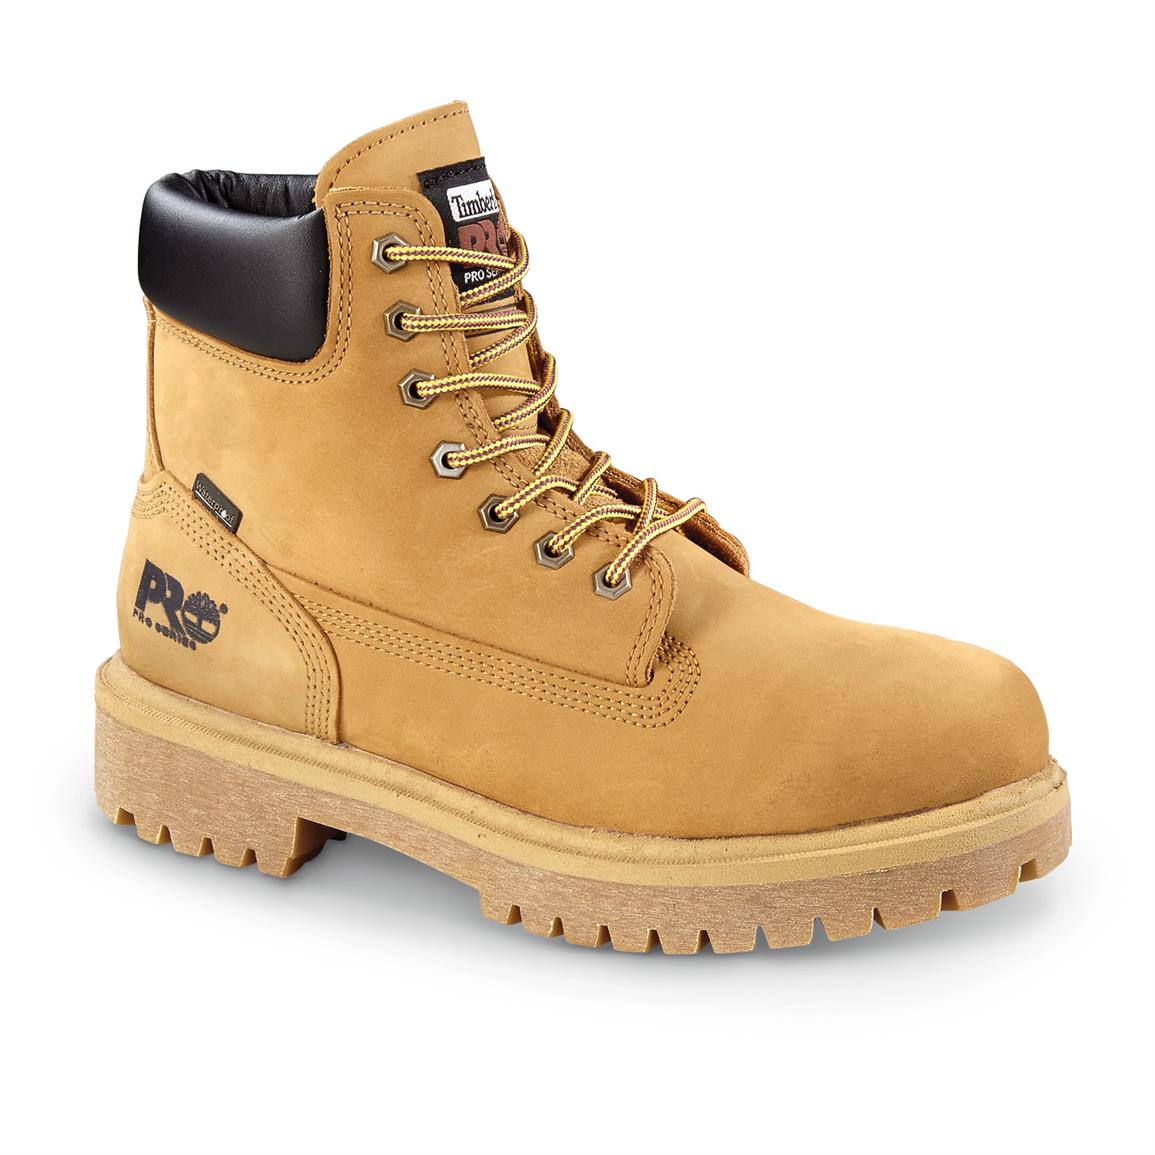 Timberland PRO Direct Attach 6" Soft Toe Waterproof Work Boots - 651283, Work Boots at Sportsman